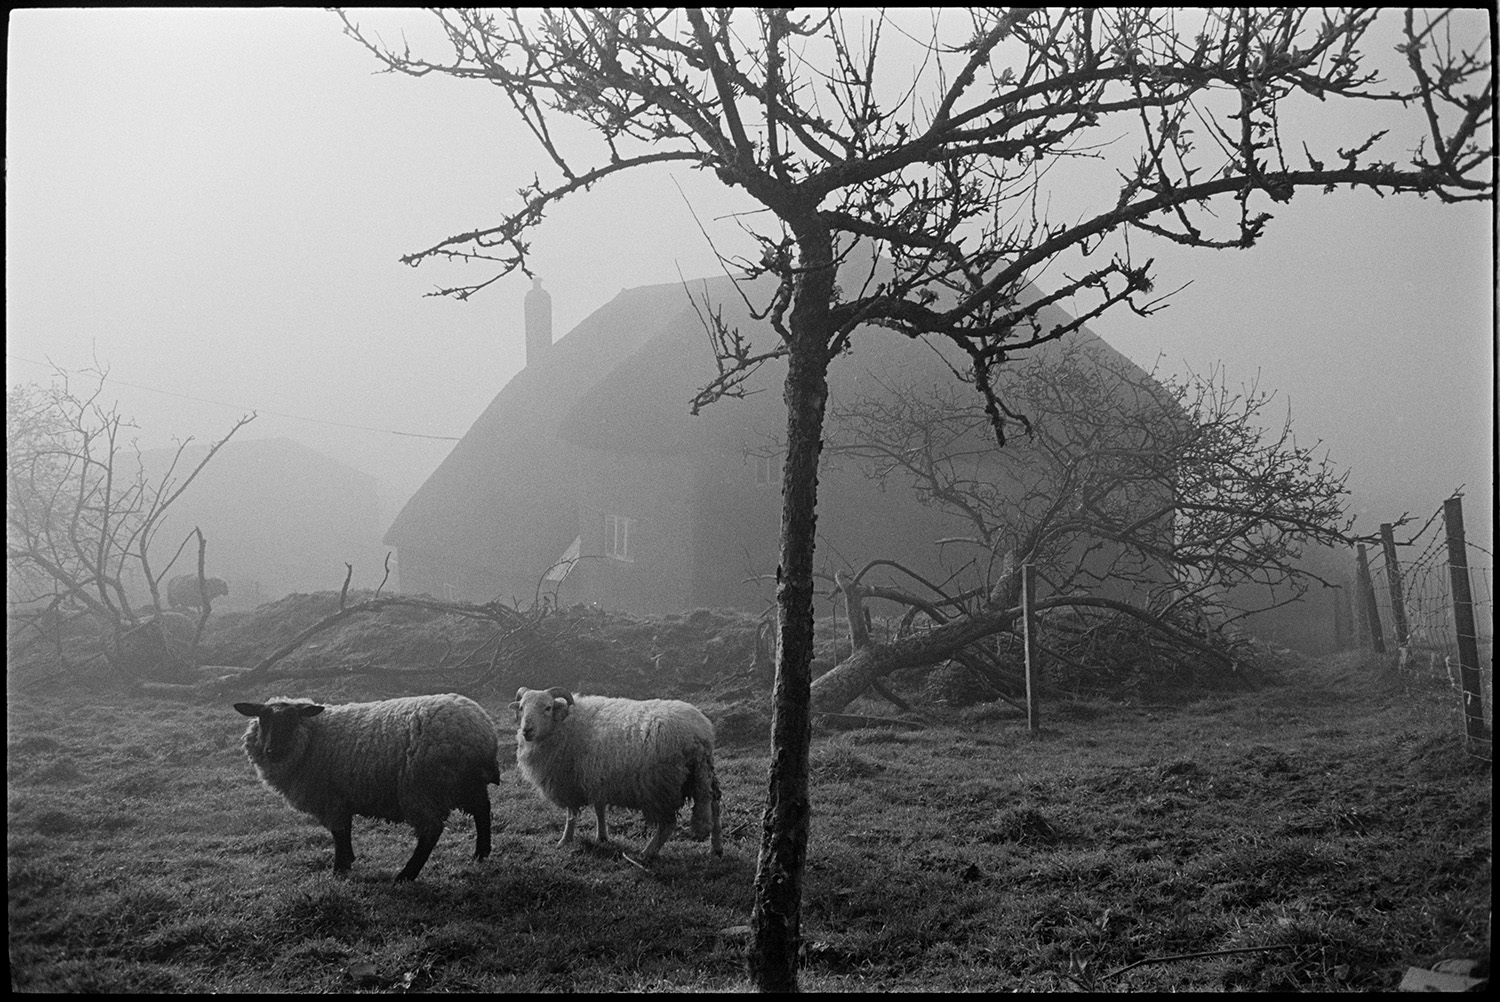 Orchards, remains of orchard at cob and thatch farmhouse, sheep misty morning.
[Two sheep standing in an old orchard at Brookland Farm, Chulmleigh on a misty morning. The cob and thatch farmhouse is visible in the background.]